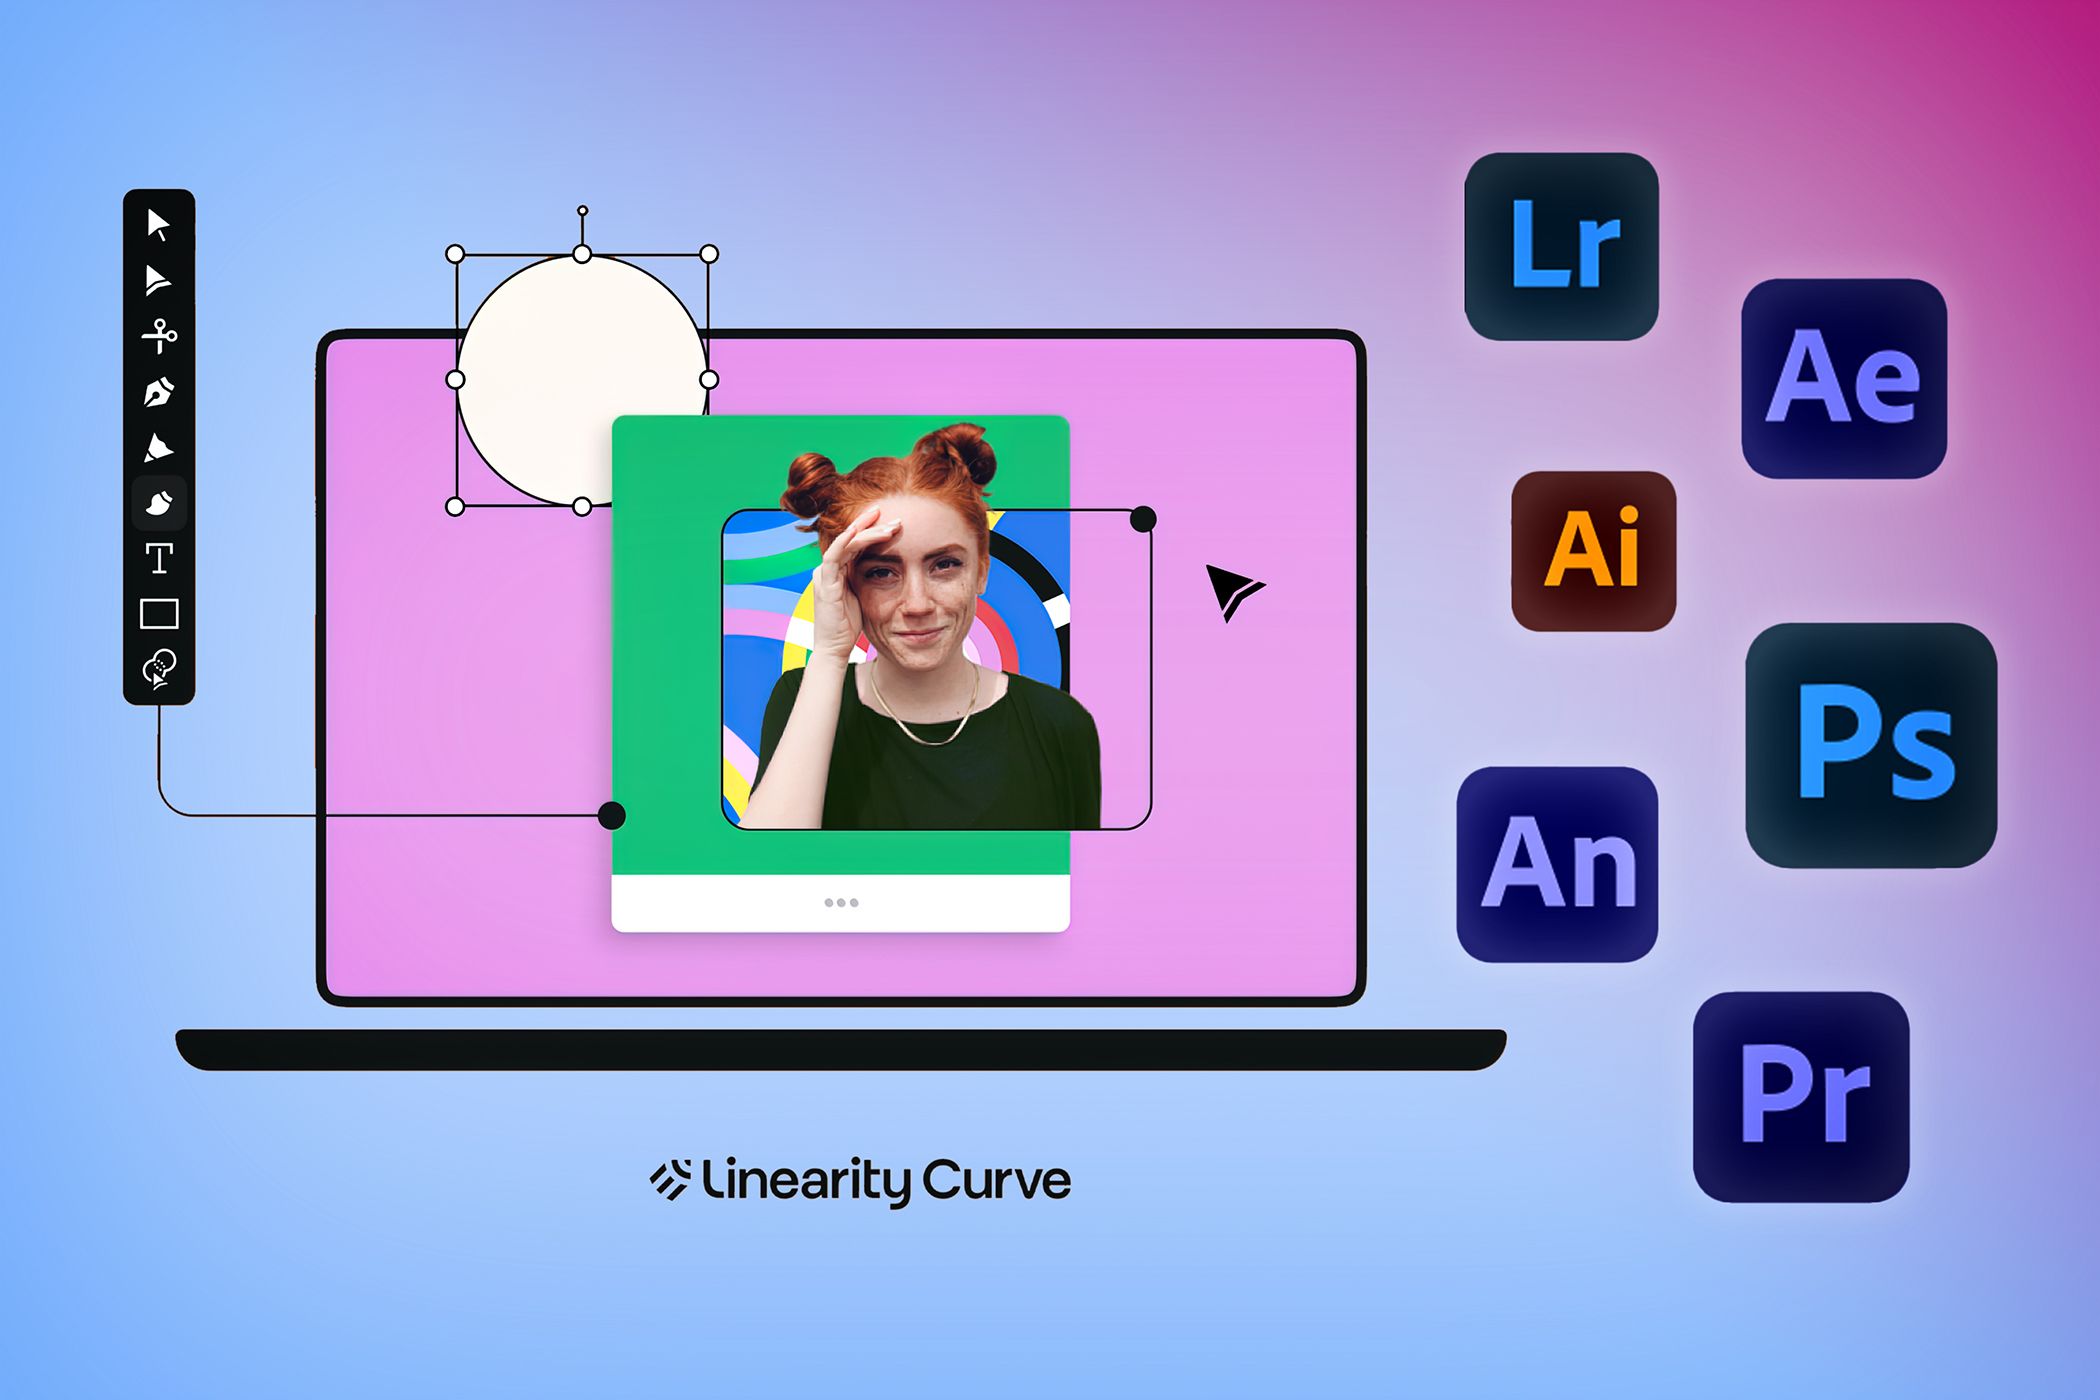 Graphic design software on a laptop screen with Adobe icons, featuring a woman being edited in a colorful layout.